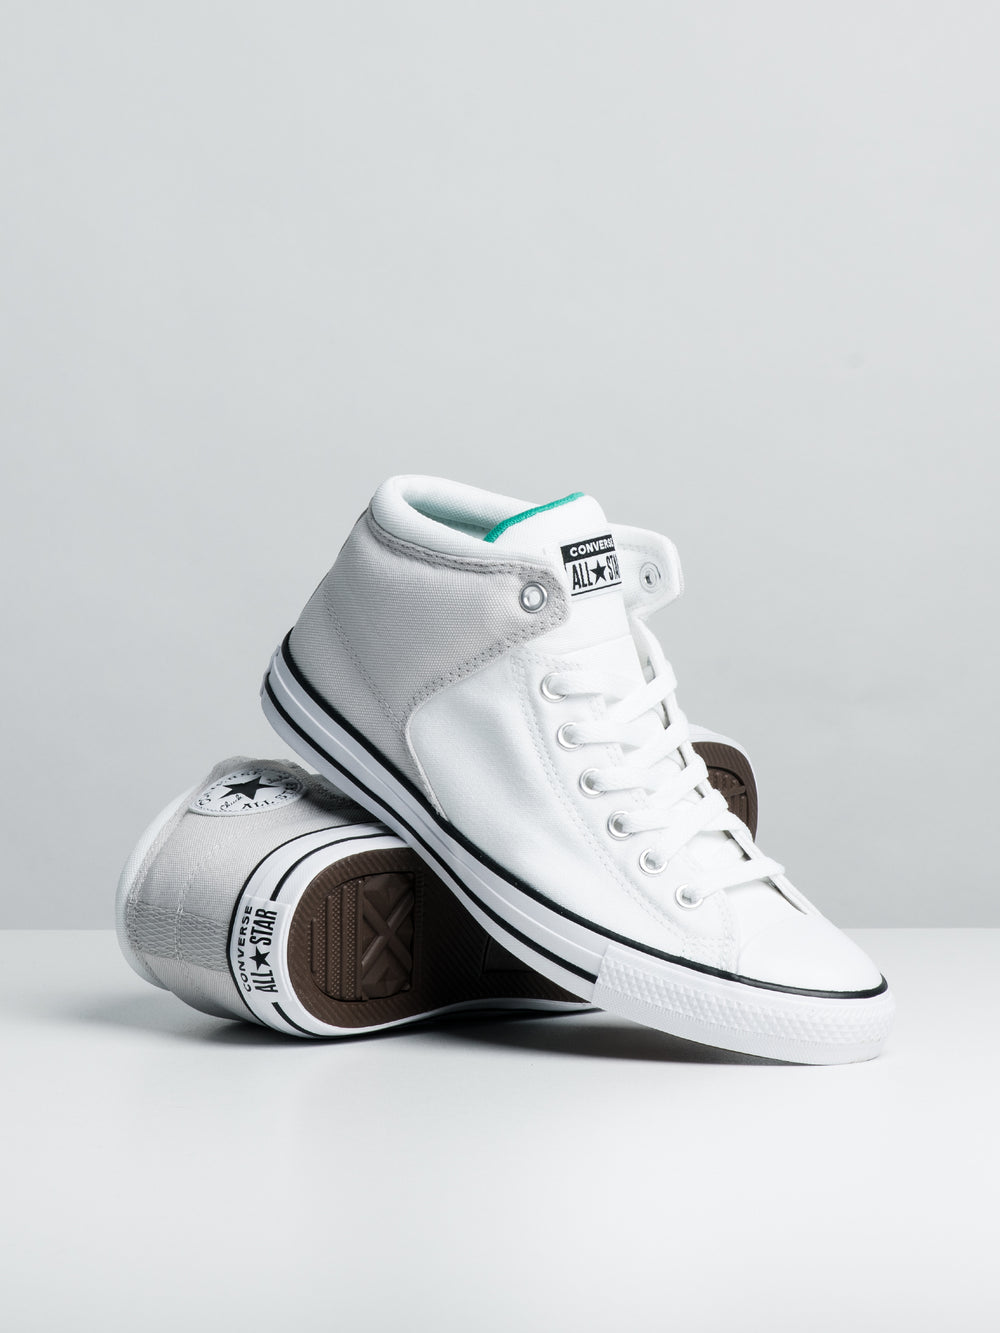 MENS CONVERSE CHUCK TAYLOR ALL STAR STREET MID TOP TOP - CLEARANCE